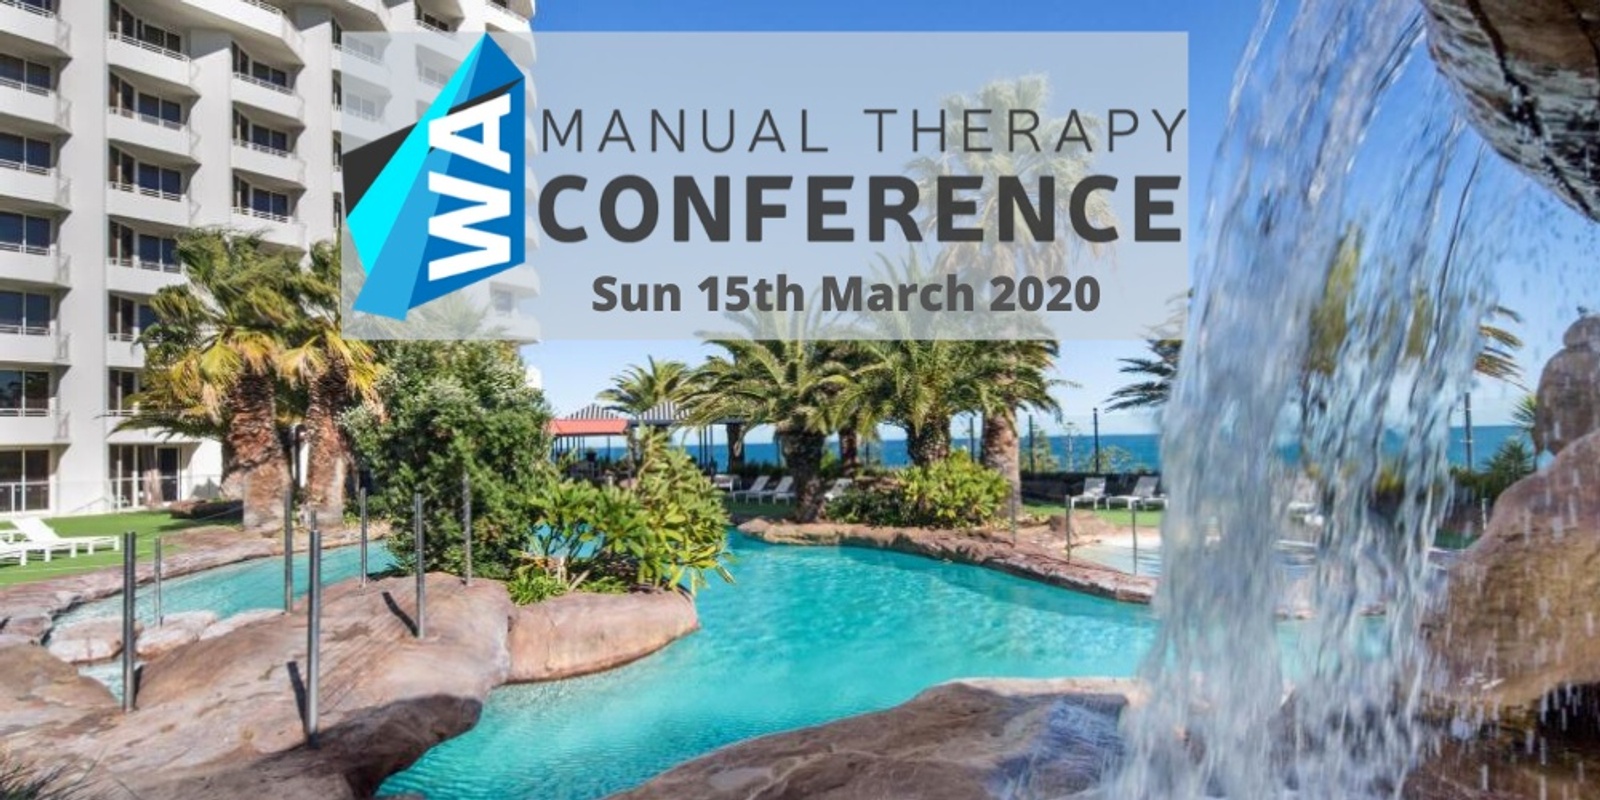 Banner image for WA Manual Therapy Conference (Scarborough WA)